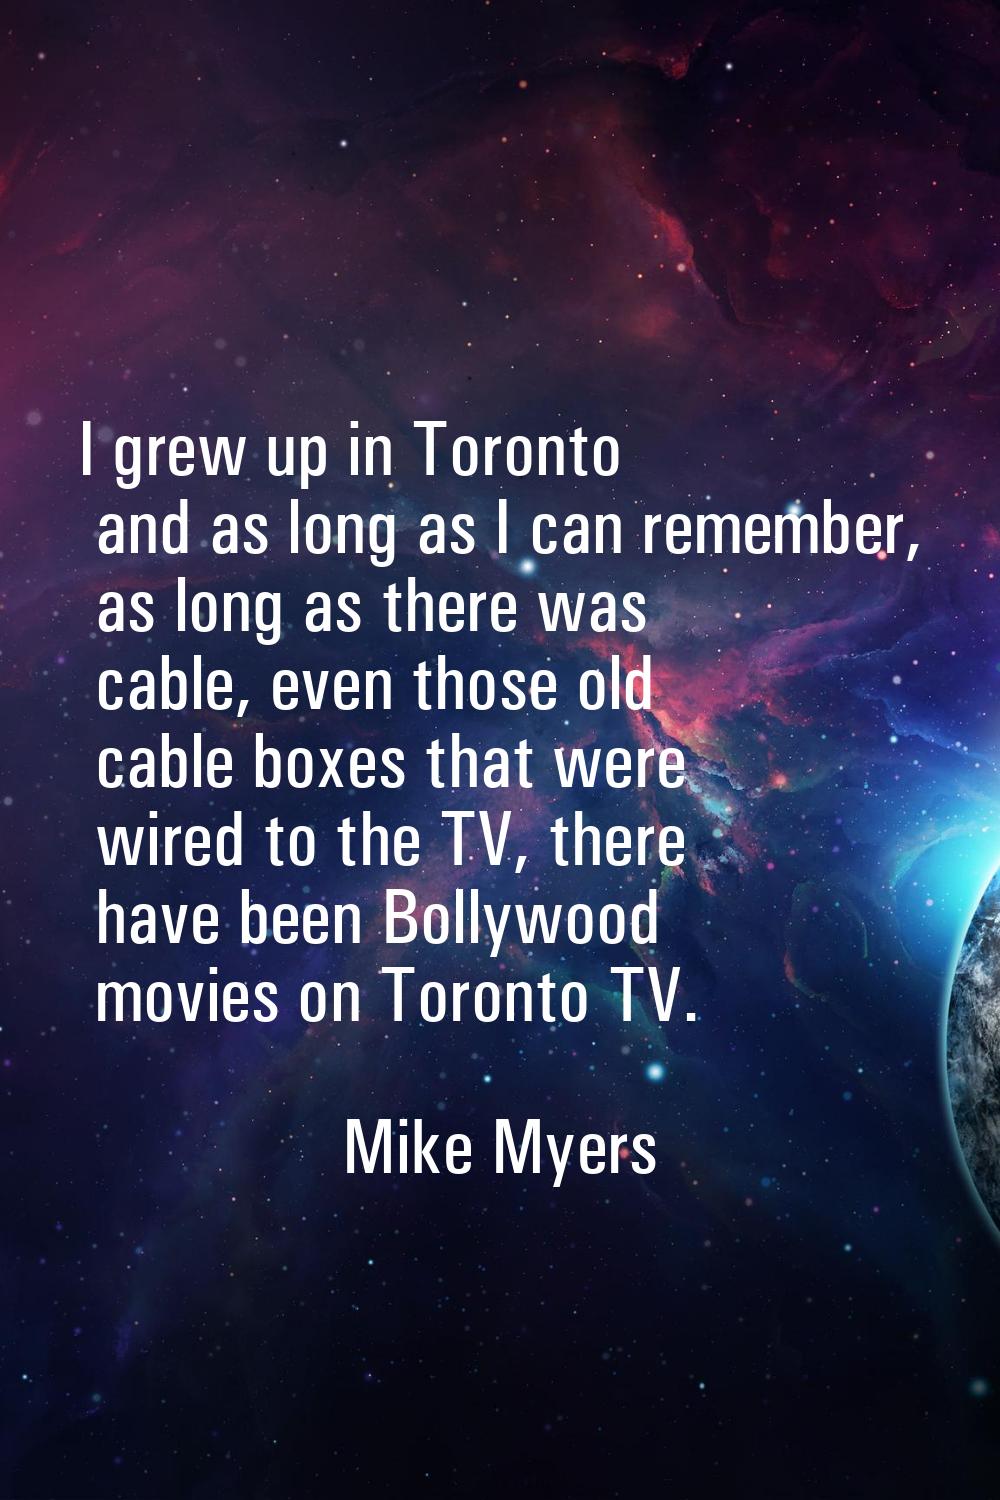 I grew up in Toronto and as long as I can remember, as long as there was cable, even those old cabl